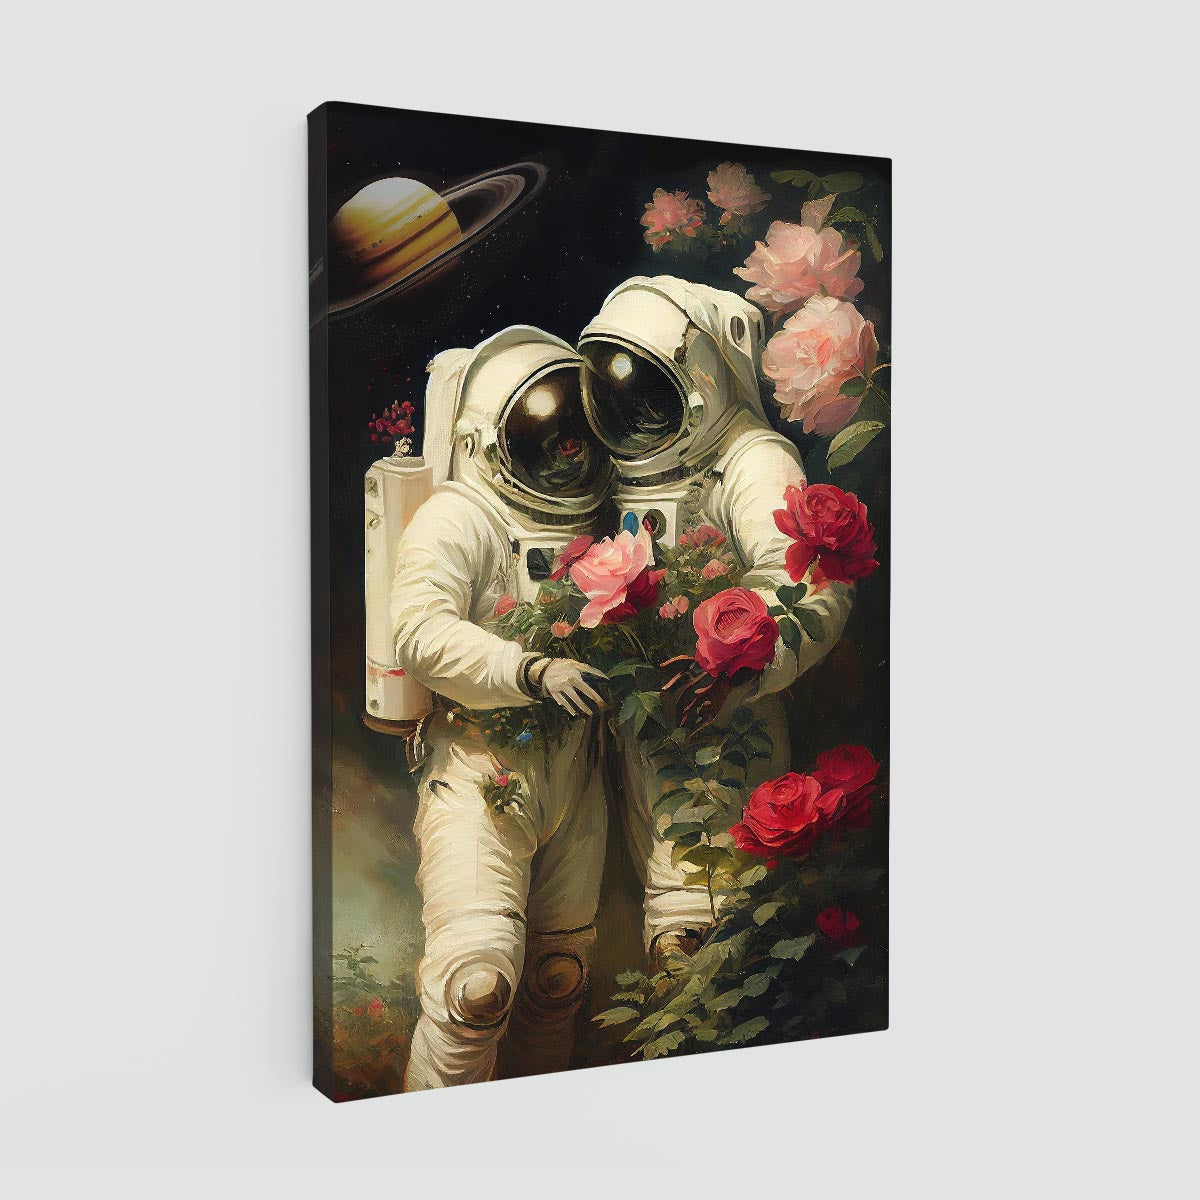 "My Space Date" canvas print